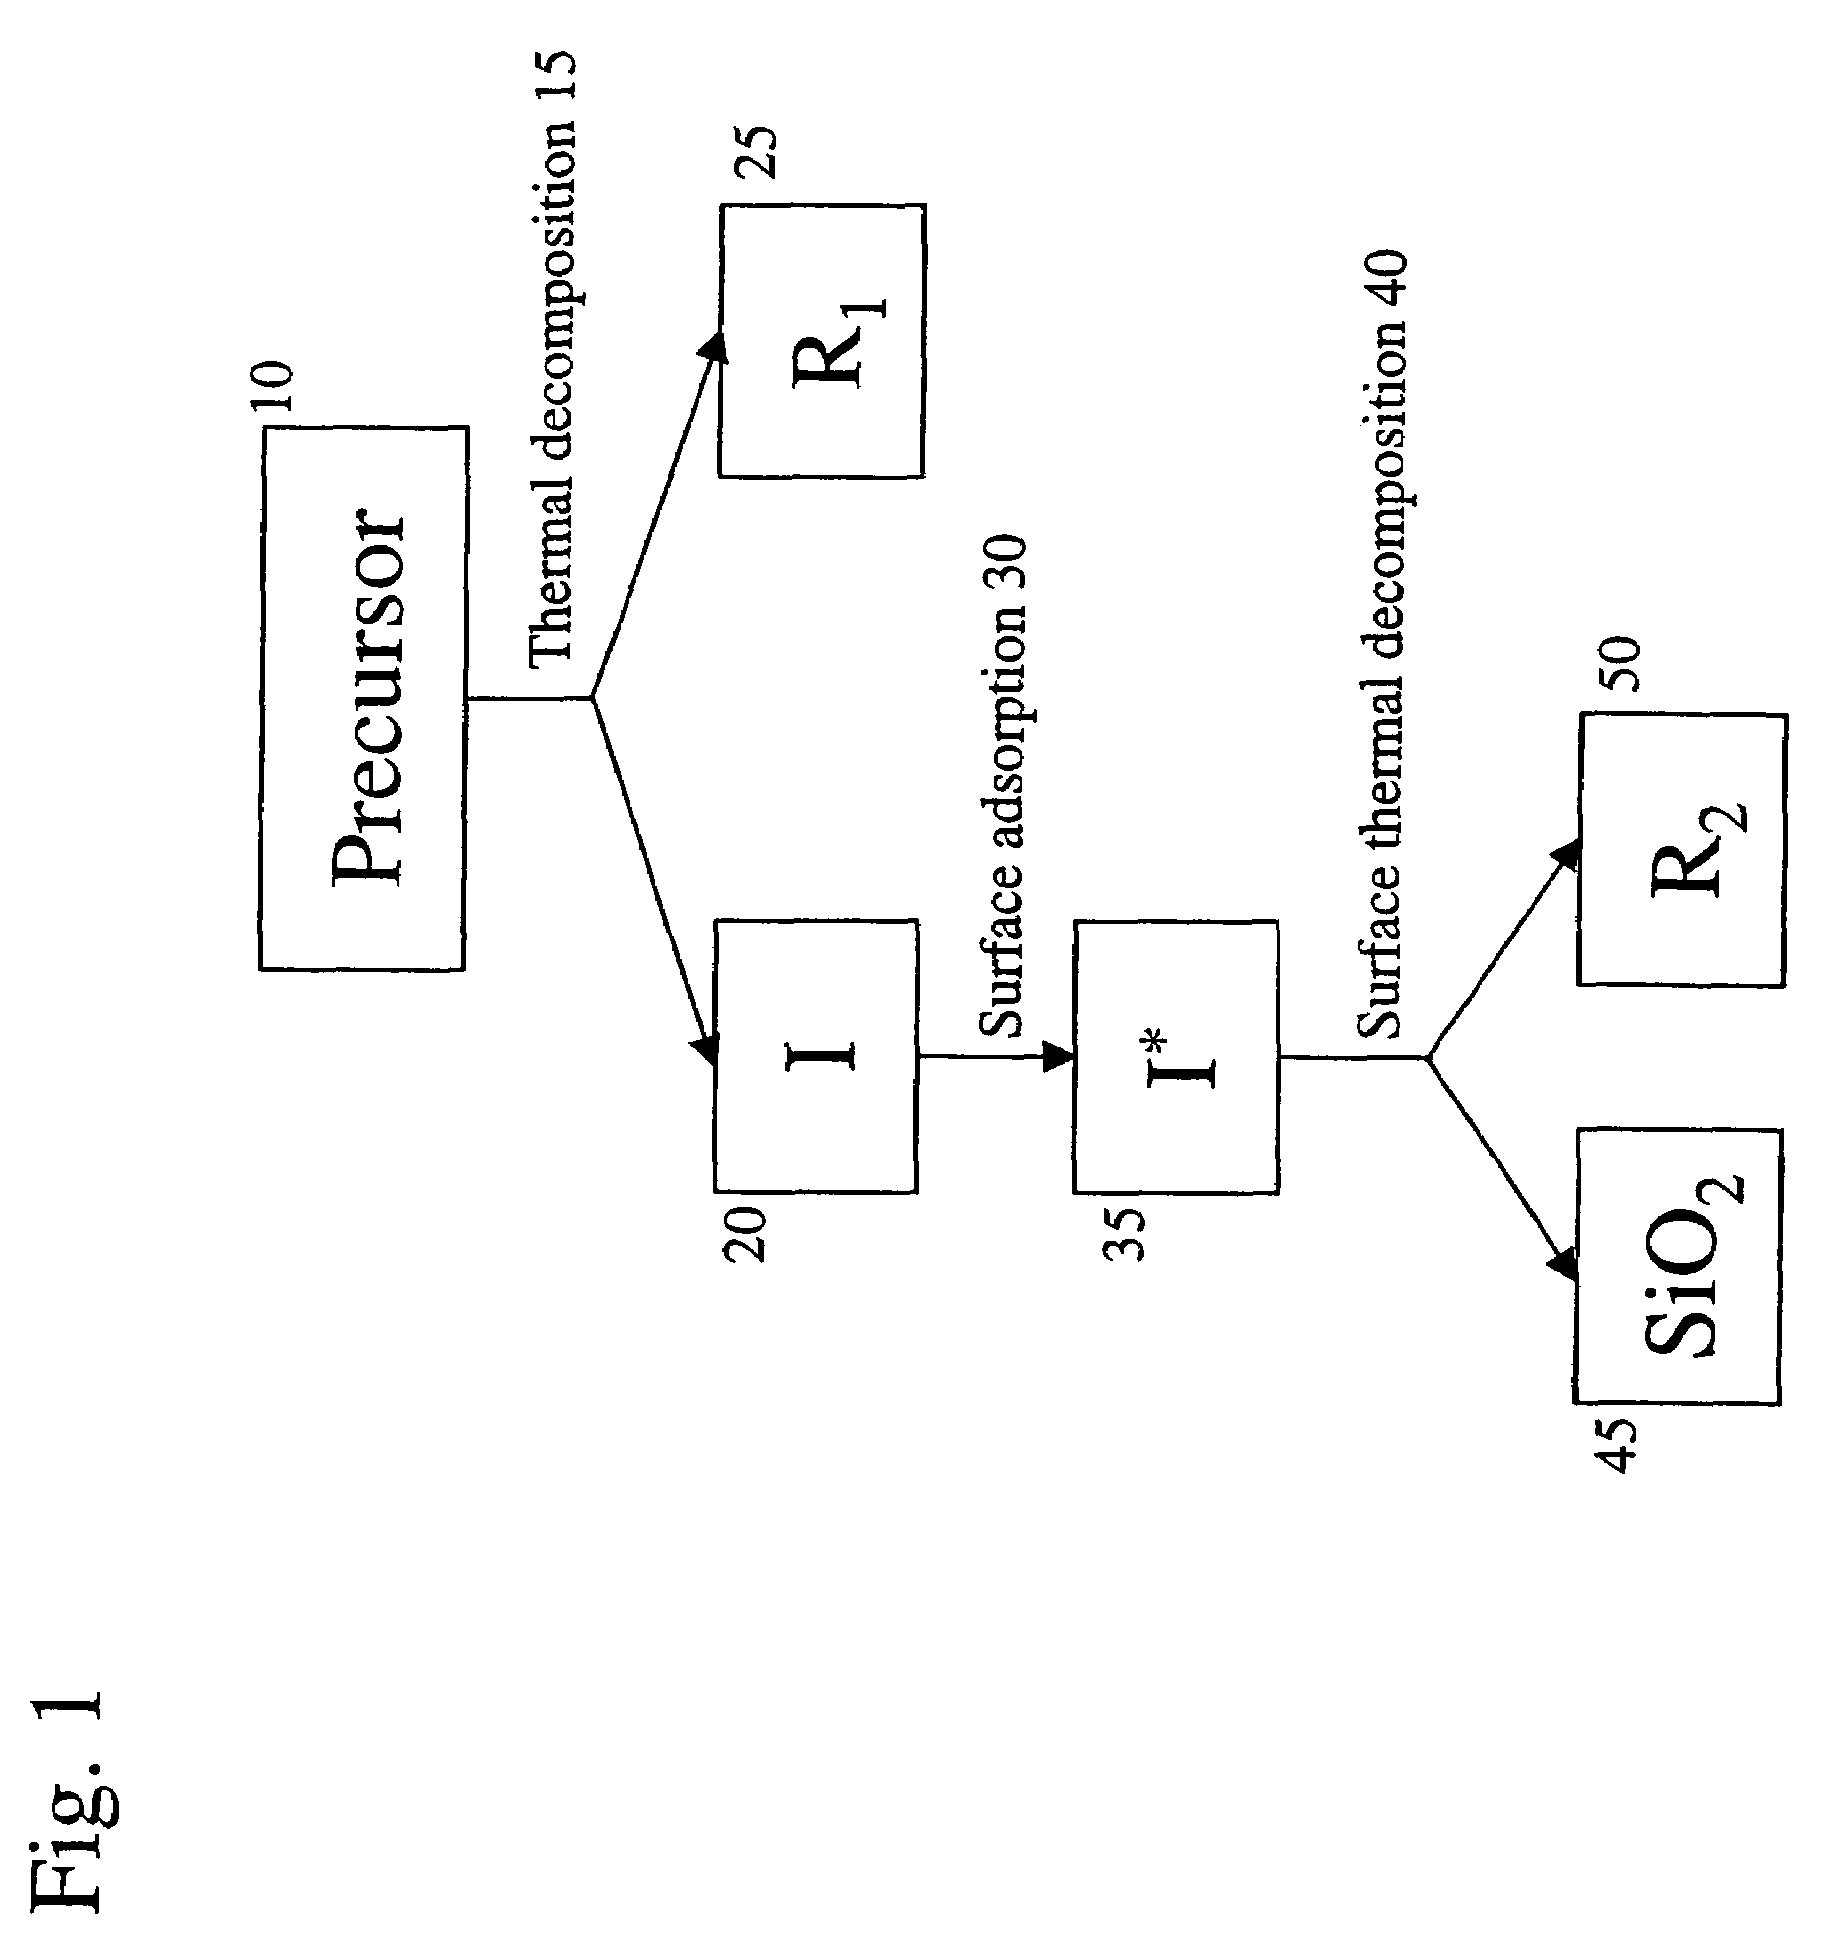 Method for deposition of inert barrier coating to increase corrosion resistance